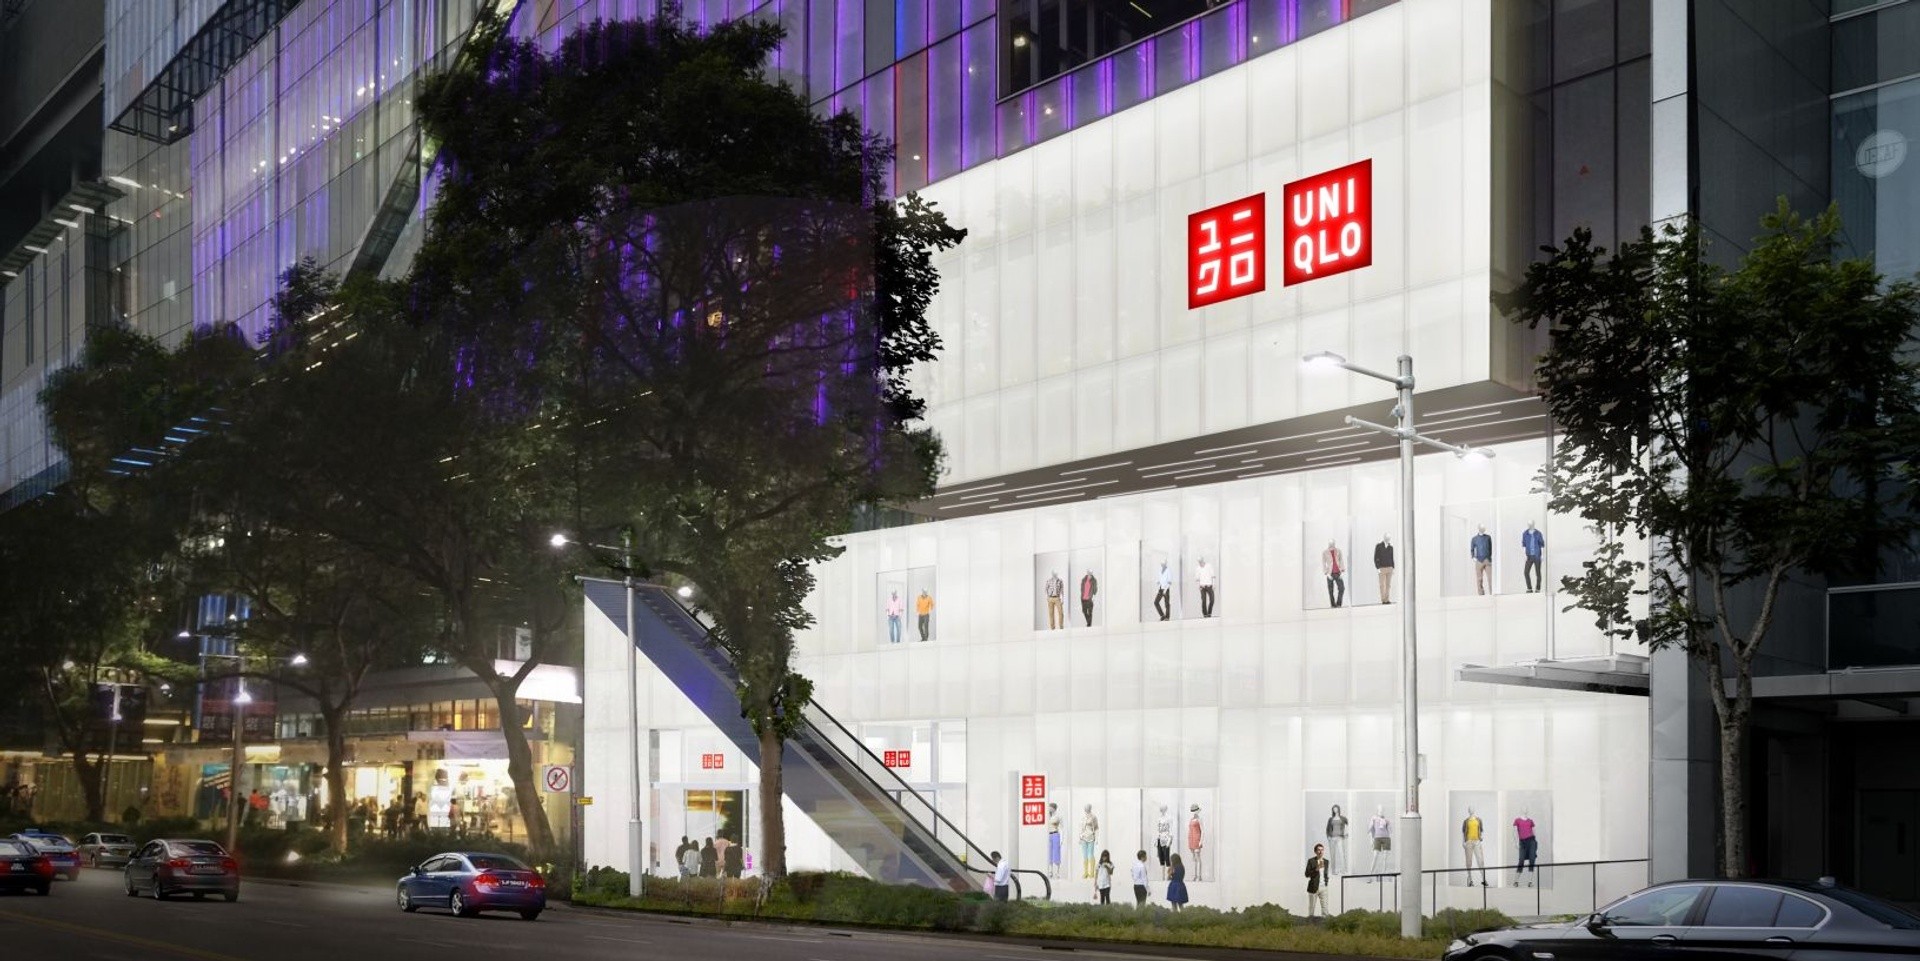 Uniqlo's new flagship store will feature original music curated by Syndicate